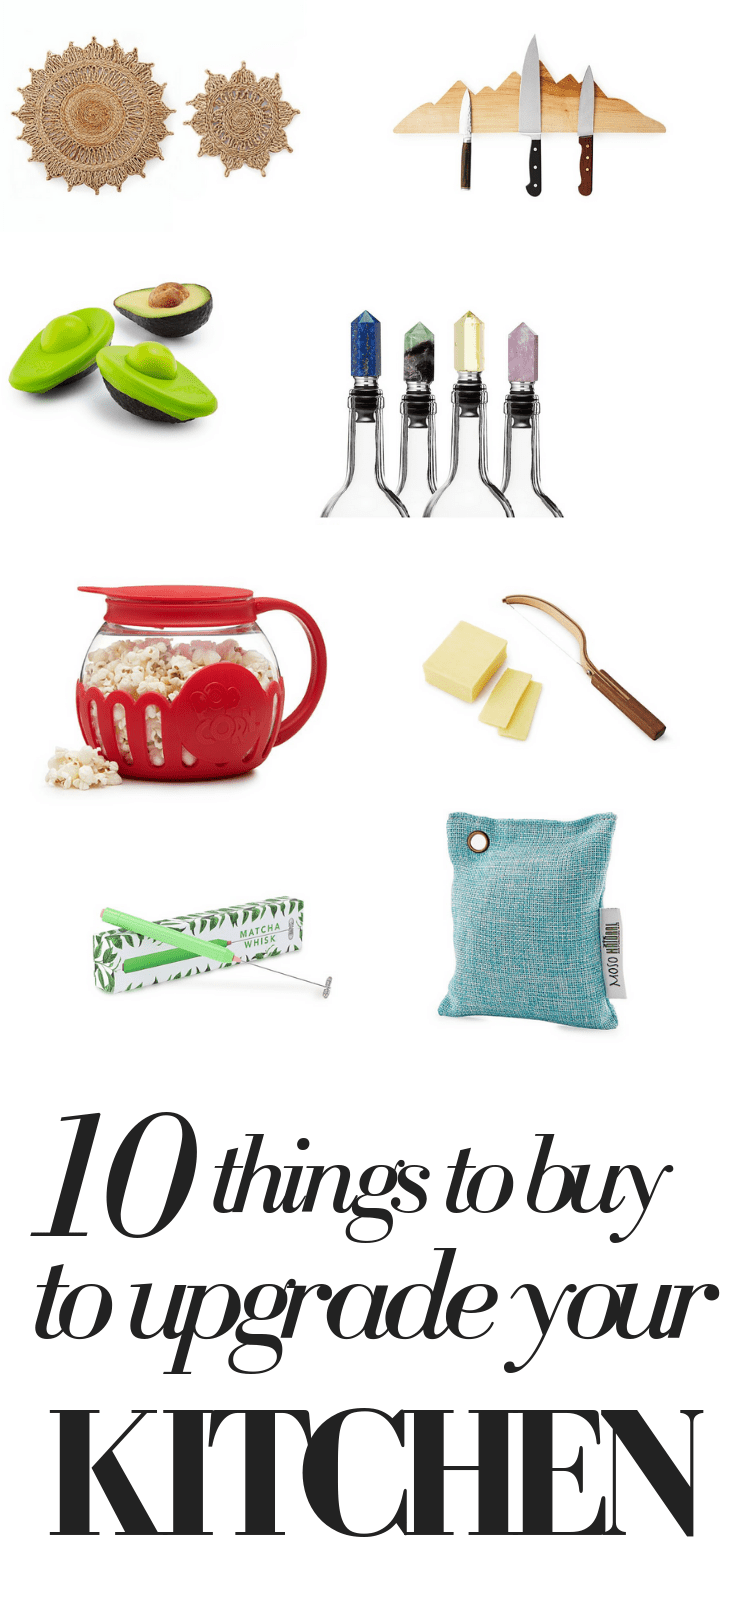 10 things to buy to upgrade your kitchen instantly